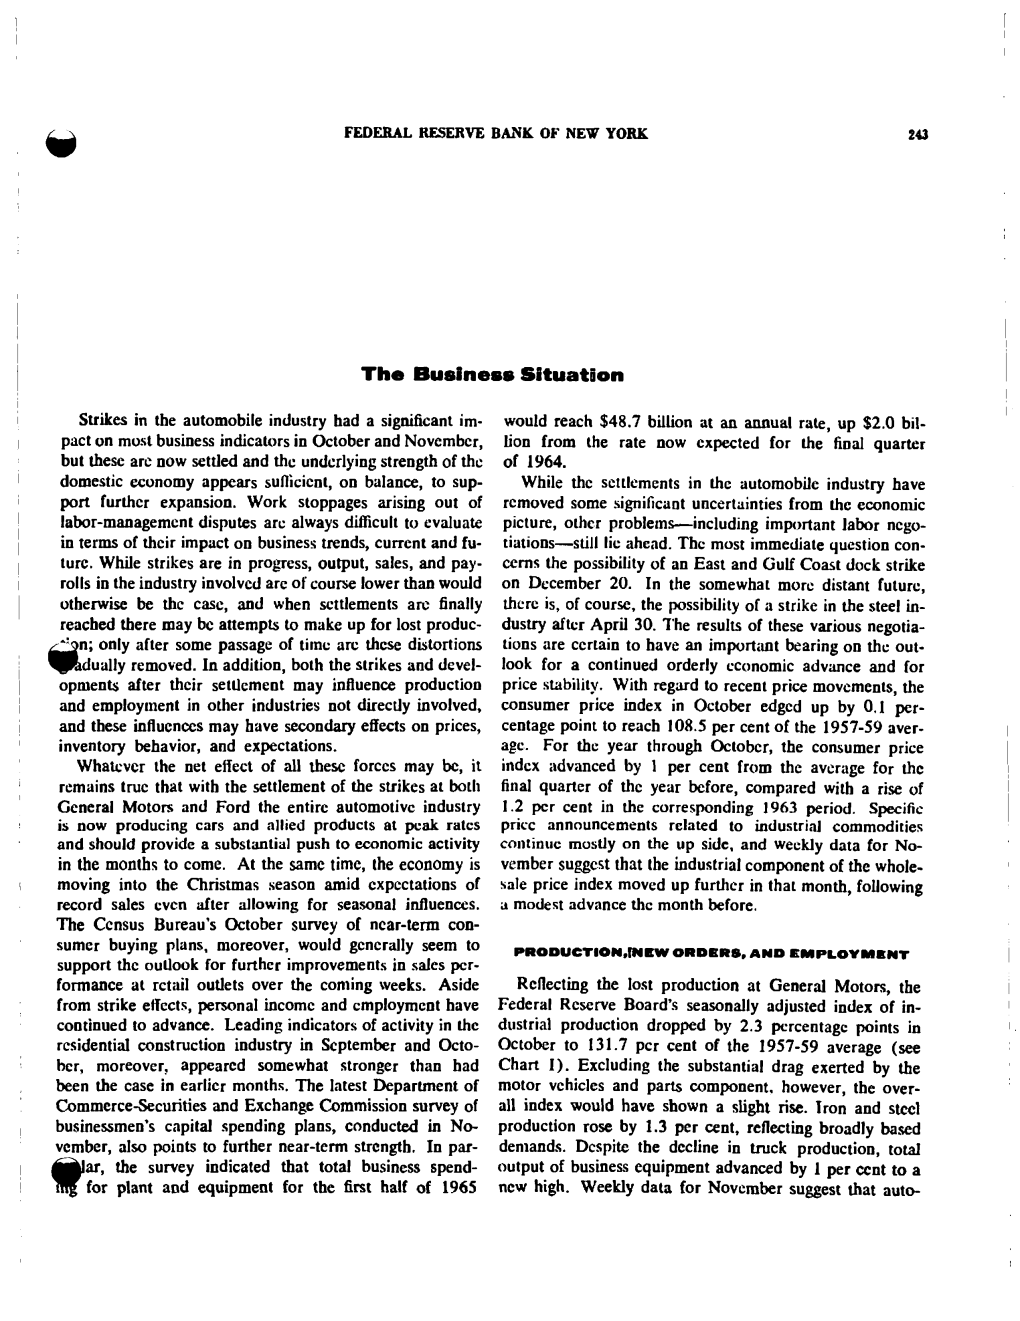 The Business Situation, December 1964